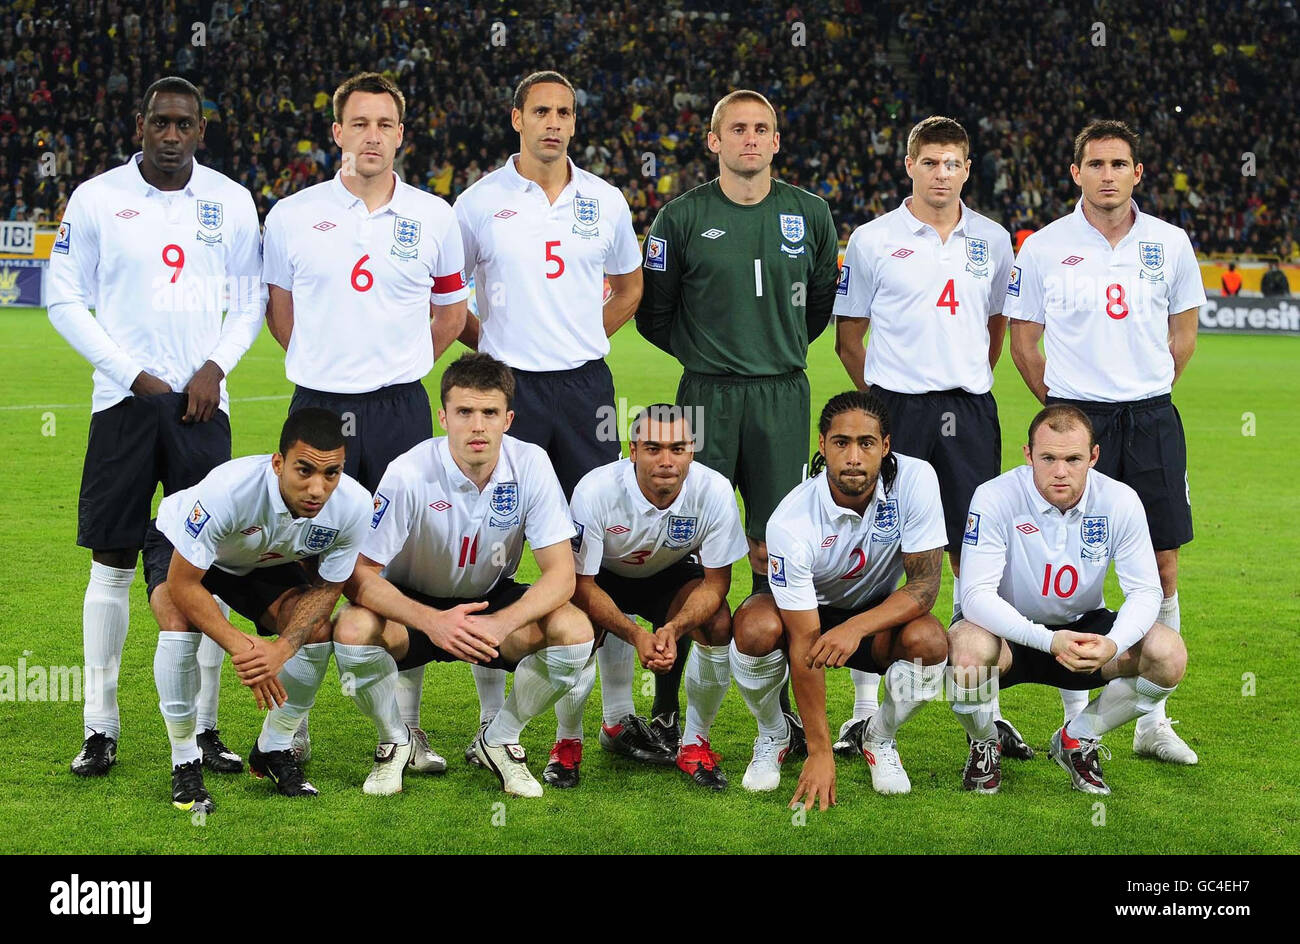 England's (left to right back row) Emile Heskey, John Terry, Rio Ferdinand, Robert Green, Steven Gerrard, Frank Lampard (bottom row left to right) Aaron Lennon, Michael Carrick, Ashley Cole, Glen Johnson and Wayne Rooney line up before the FIFA World Cup Qualifying match at the Dnipro Arena, Dnipropetrovsk, Ukraine. Stock Photo